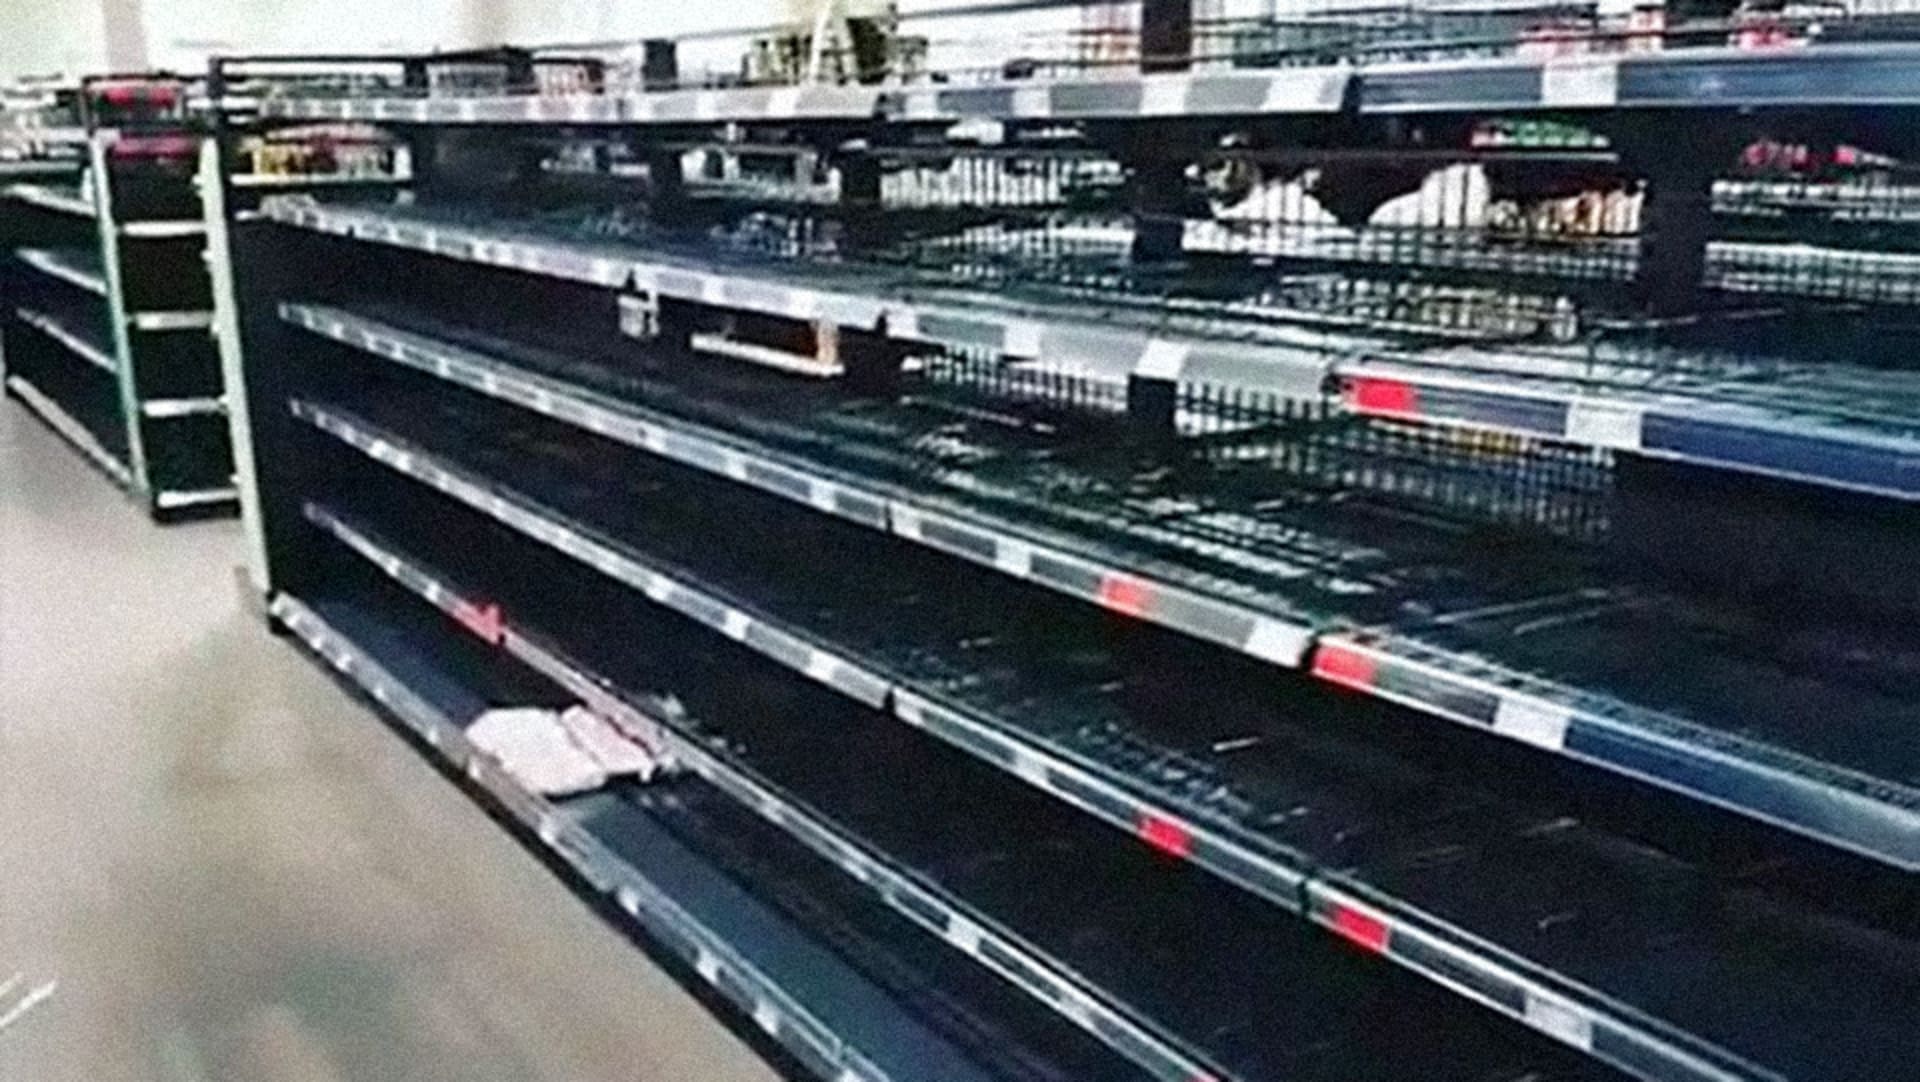 This Grocery Store Cleared Its Shelves Of Foreign Foods To Make A Statement About Racism